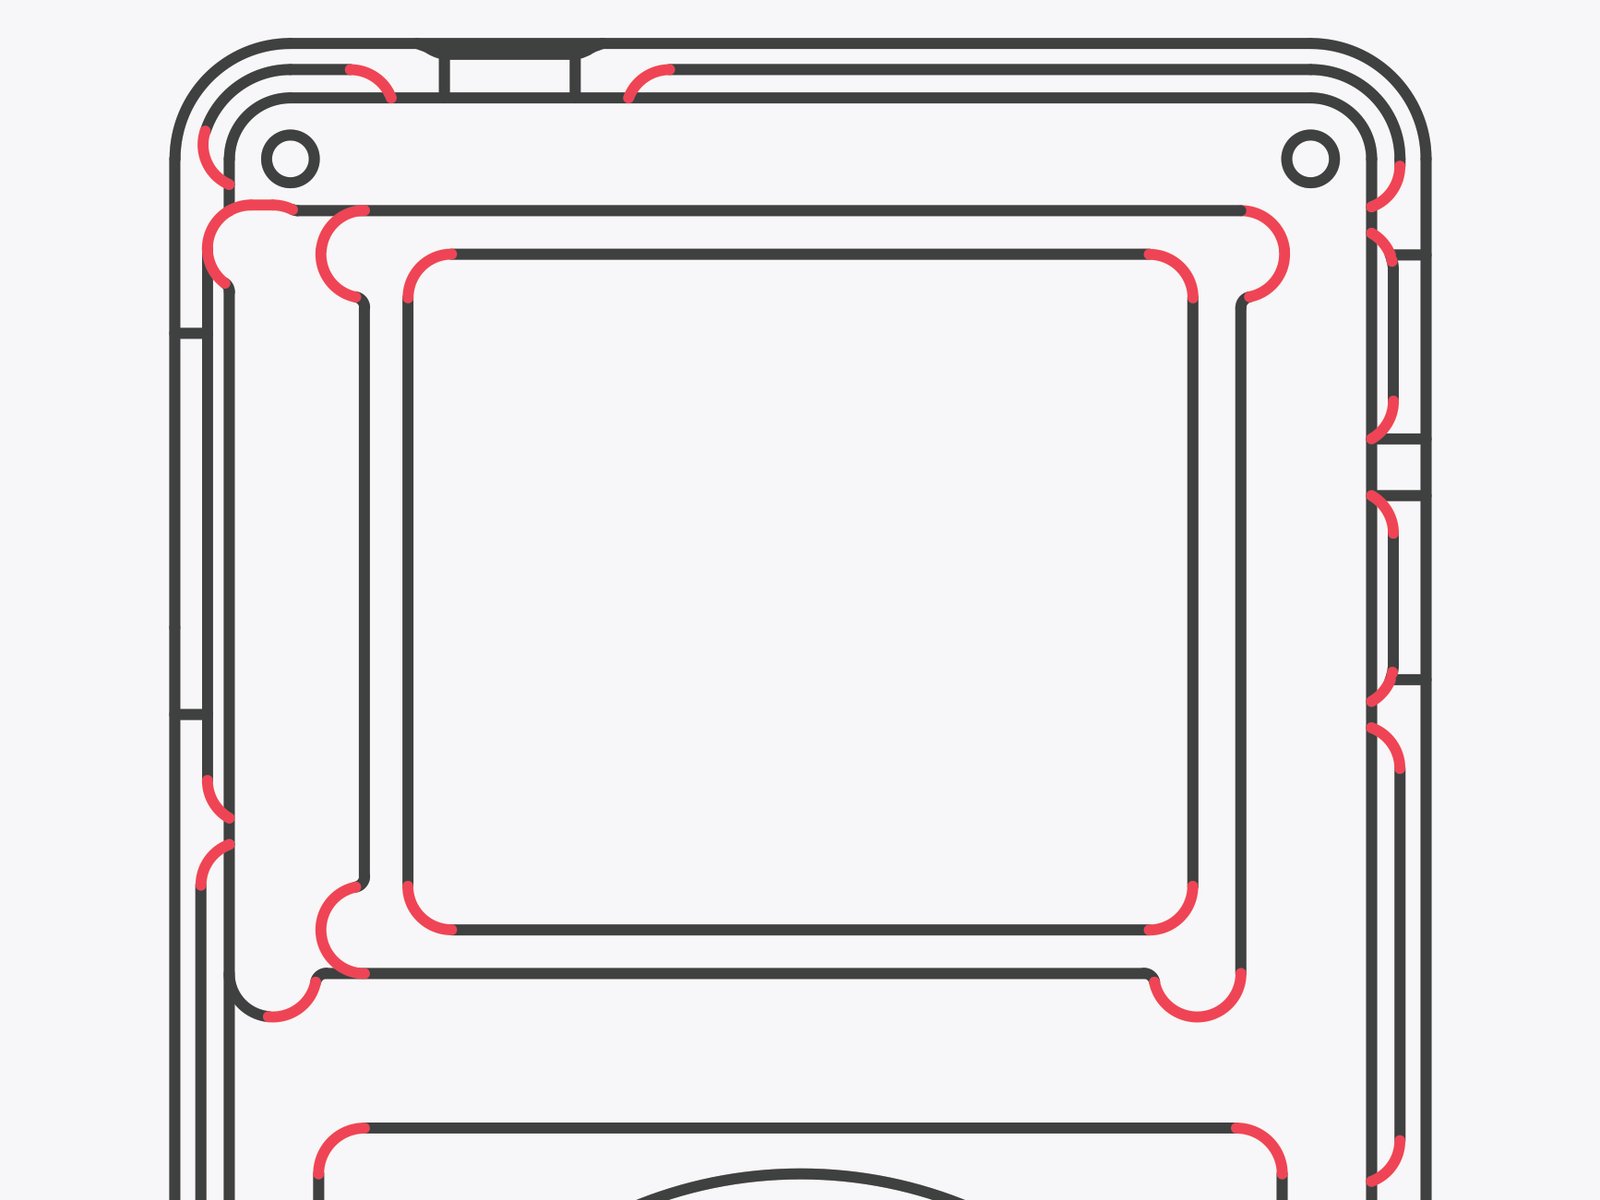 A top down view of the front shell showing the features highlighted in red.